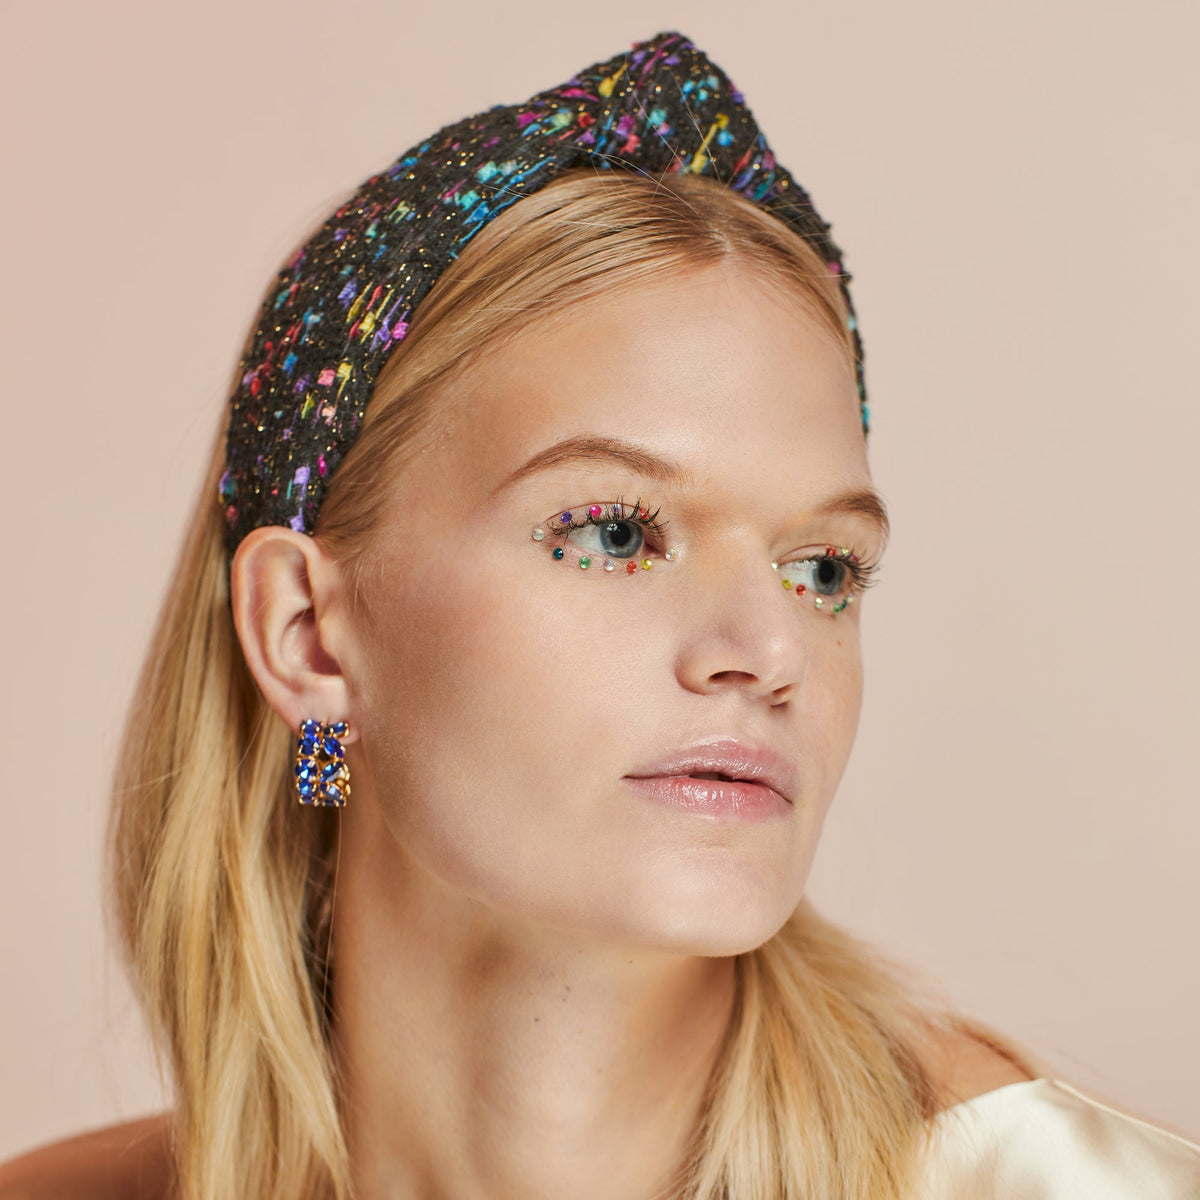 GOLD DUST David Mallett, The ultimate hair accessory that brings bounce  with sparkle and shimmer.